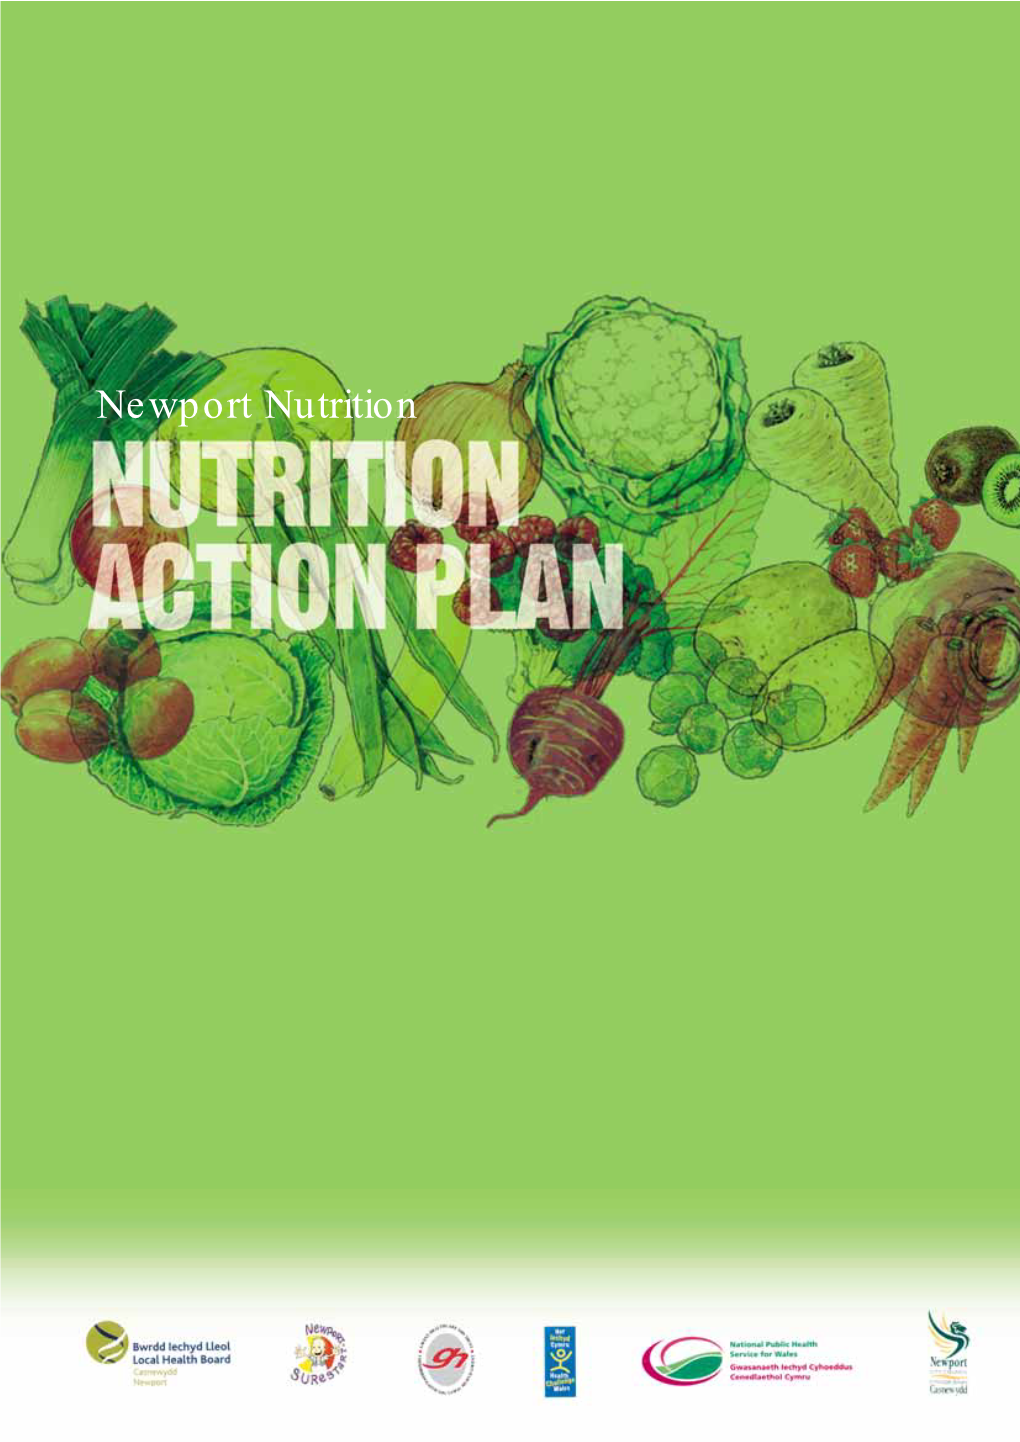 Newport Nutrition Improving Nutrition Is Currently a Public Health Priority